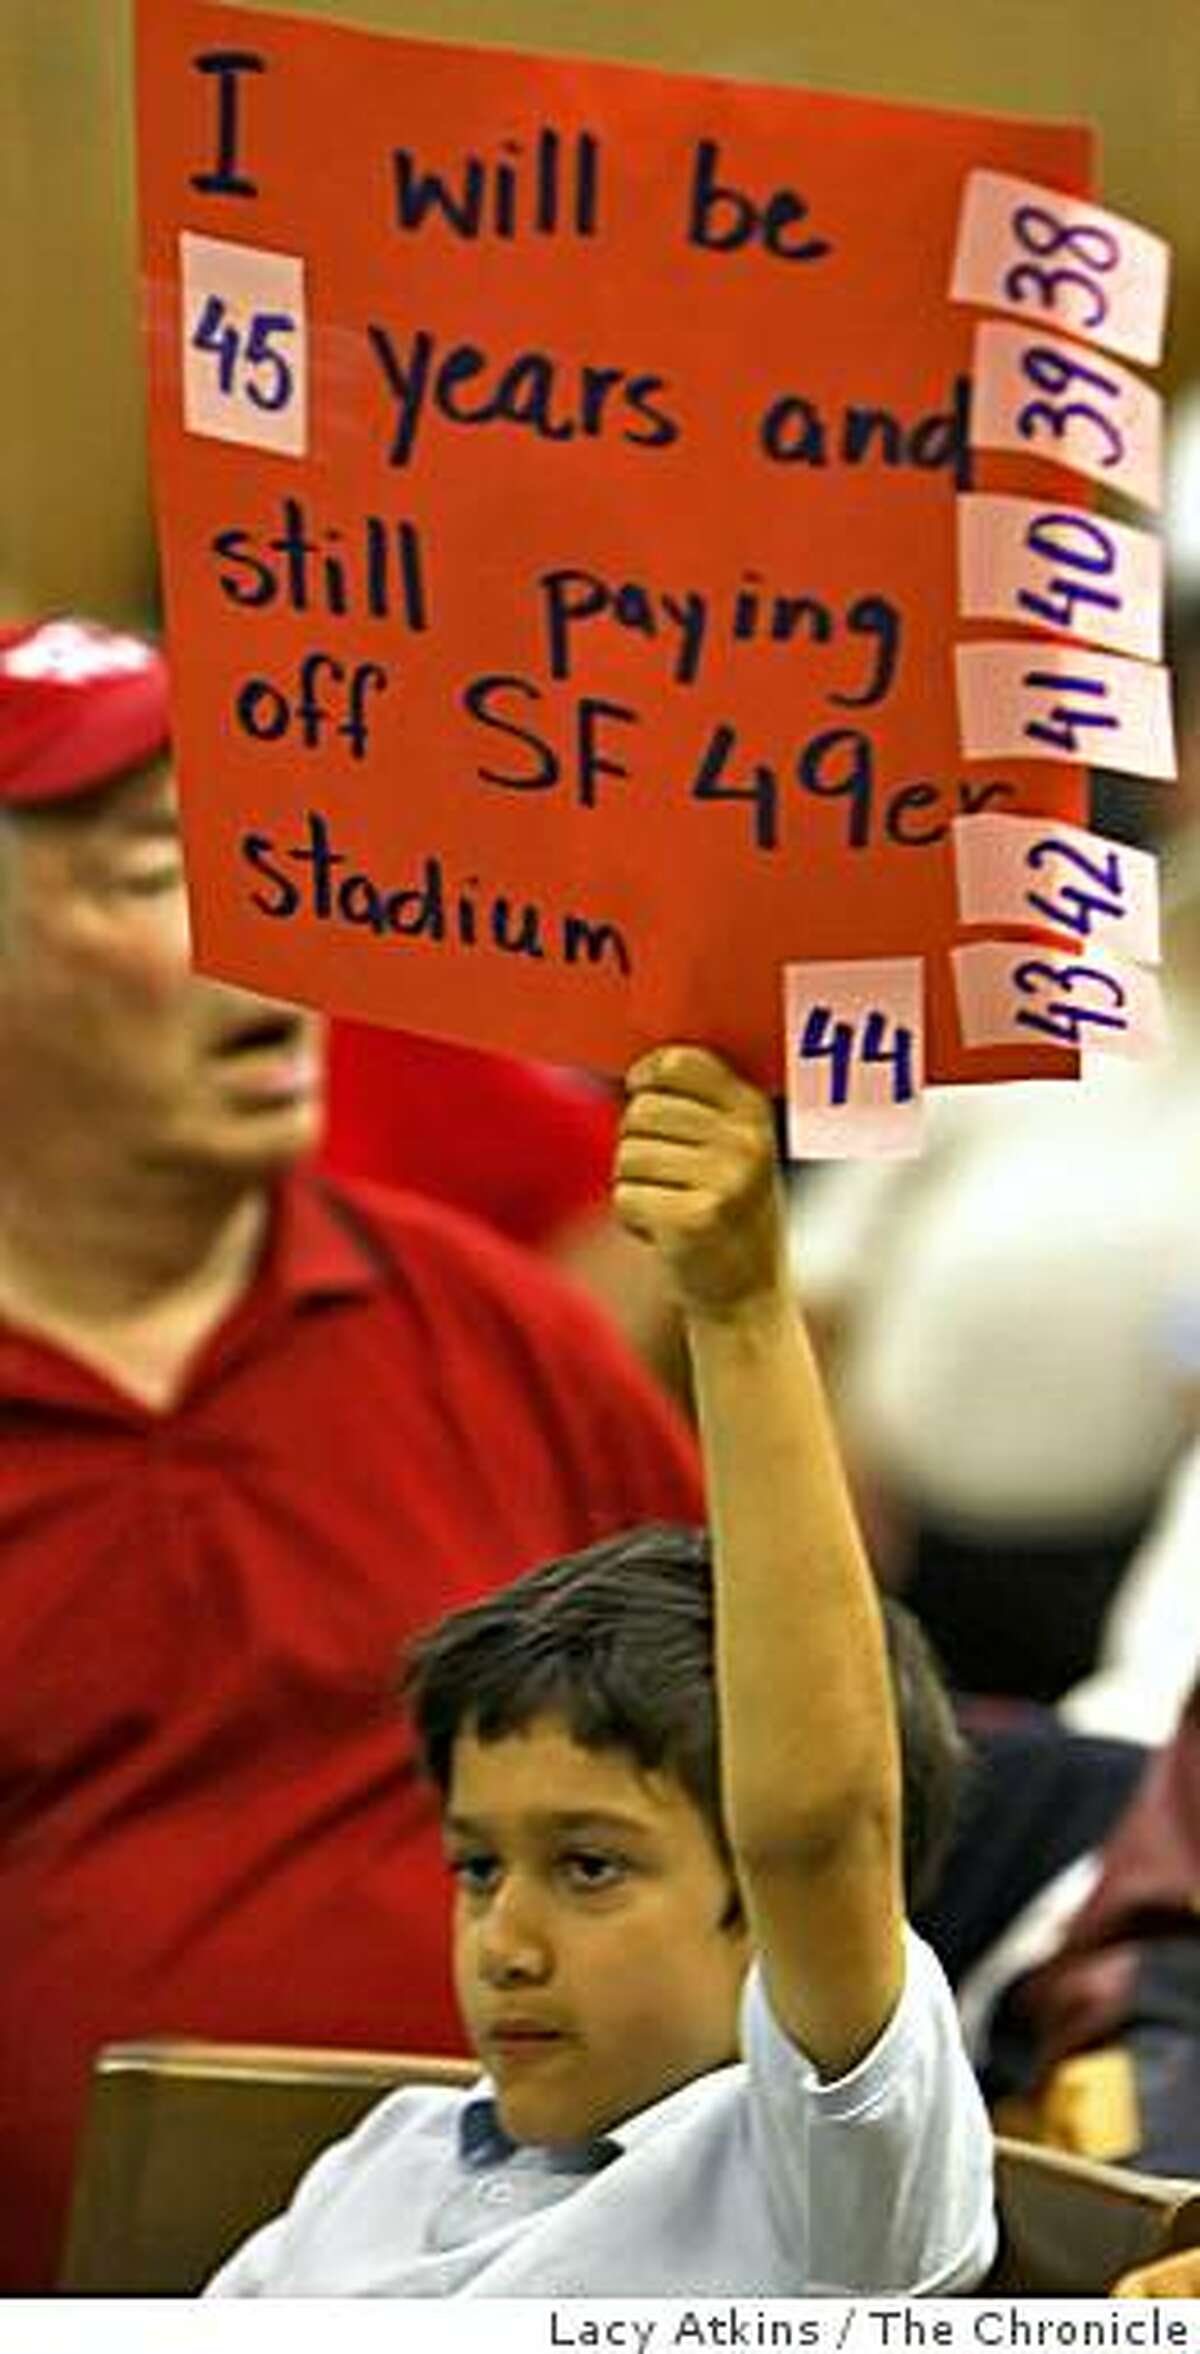 Jaafer Saadat holds up a sign against moving the San Francisco 49ers to Santa Clara, at the city council meeting, Tuesday June 2, 2009, in Santa Clara, Calif.